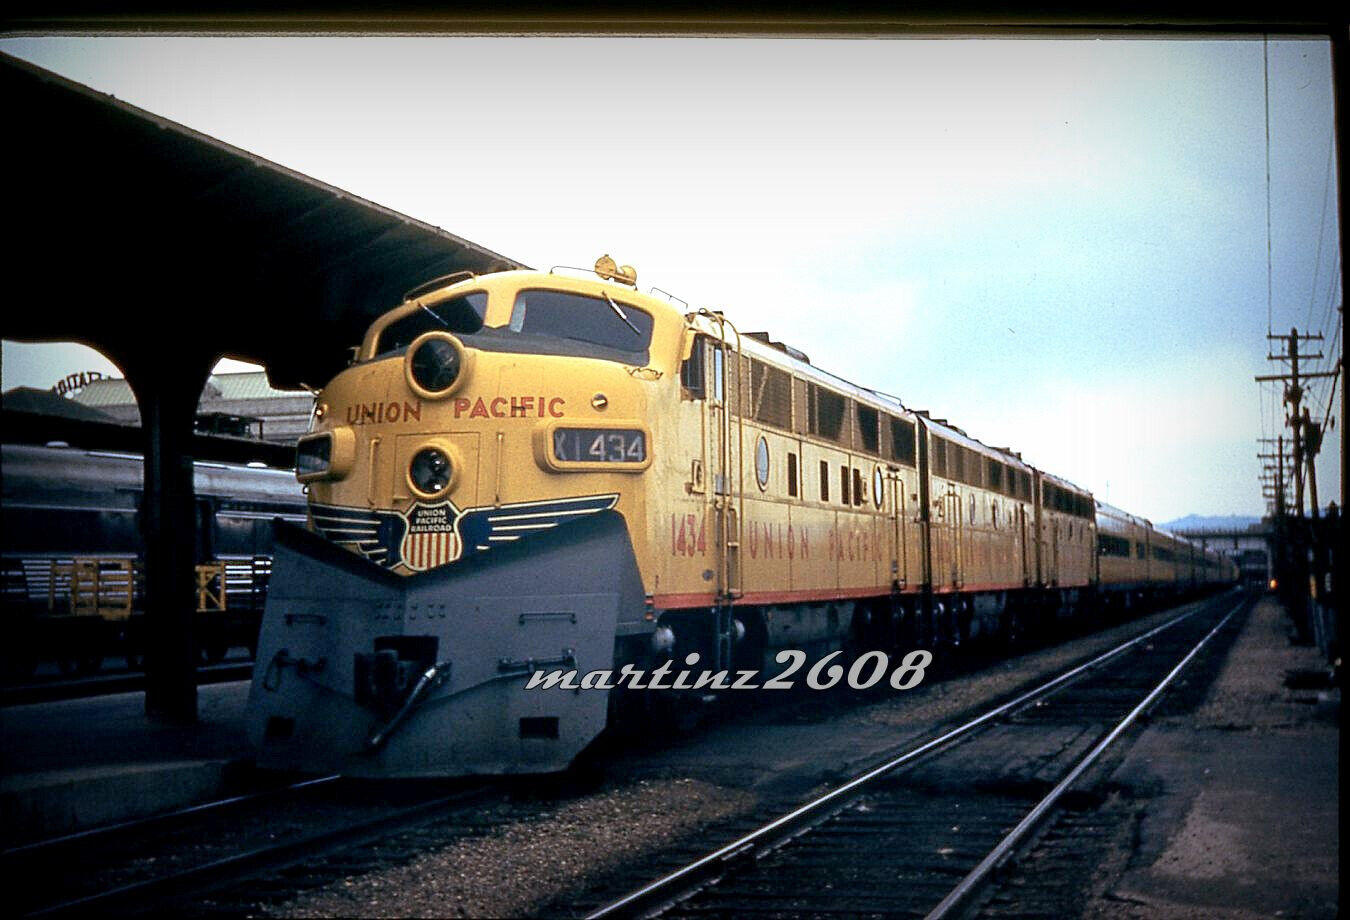 (MZ) DUPE TRAIN SLIDE UNION PACIFIC (UP) 1434 W/ TRAIN IN STATION